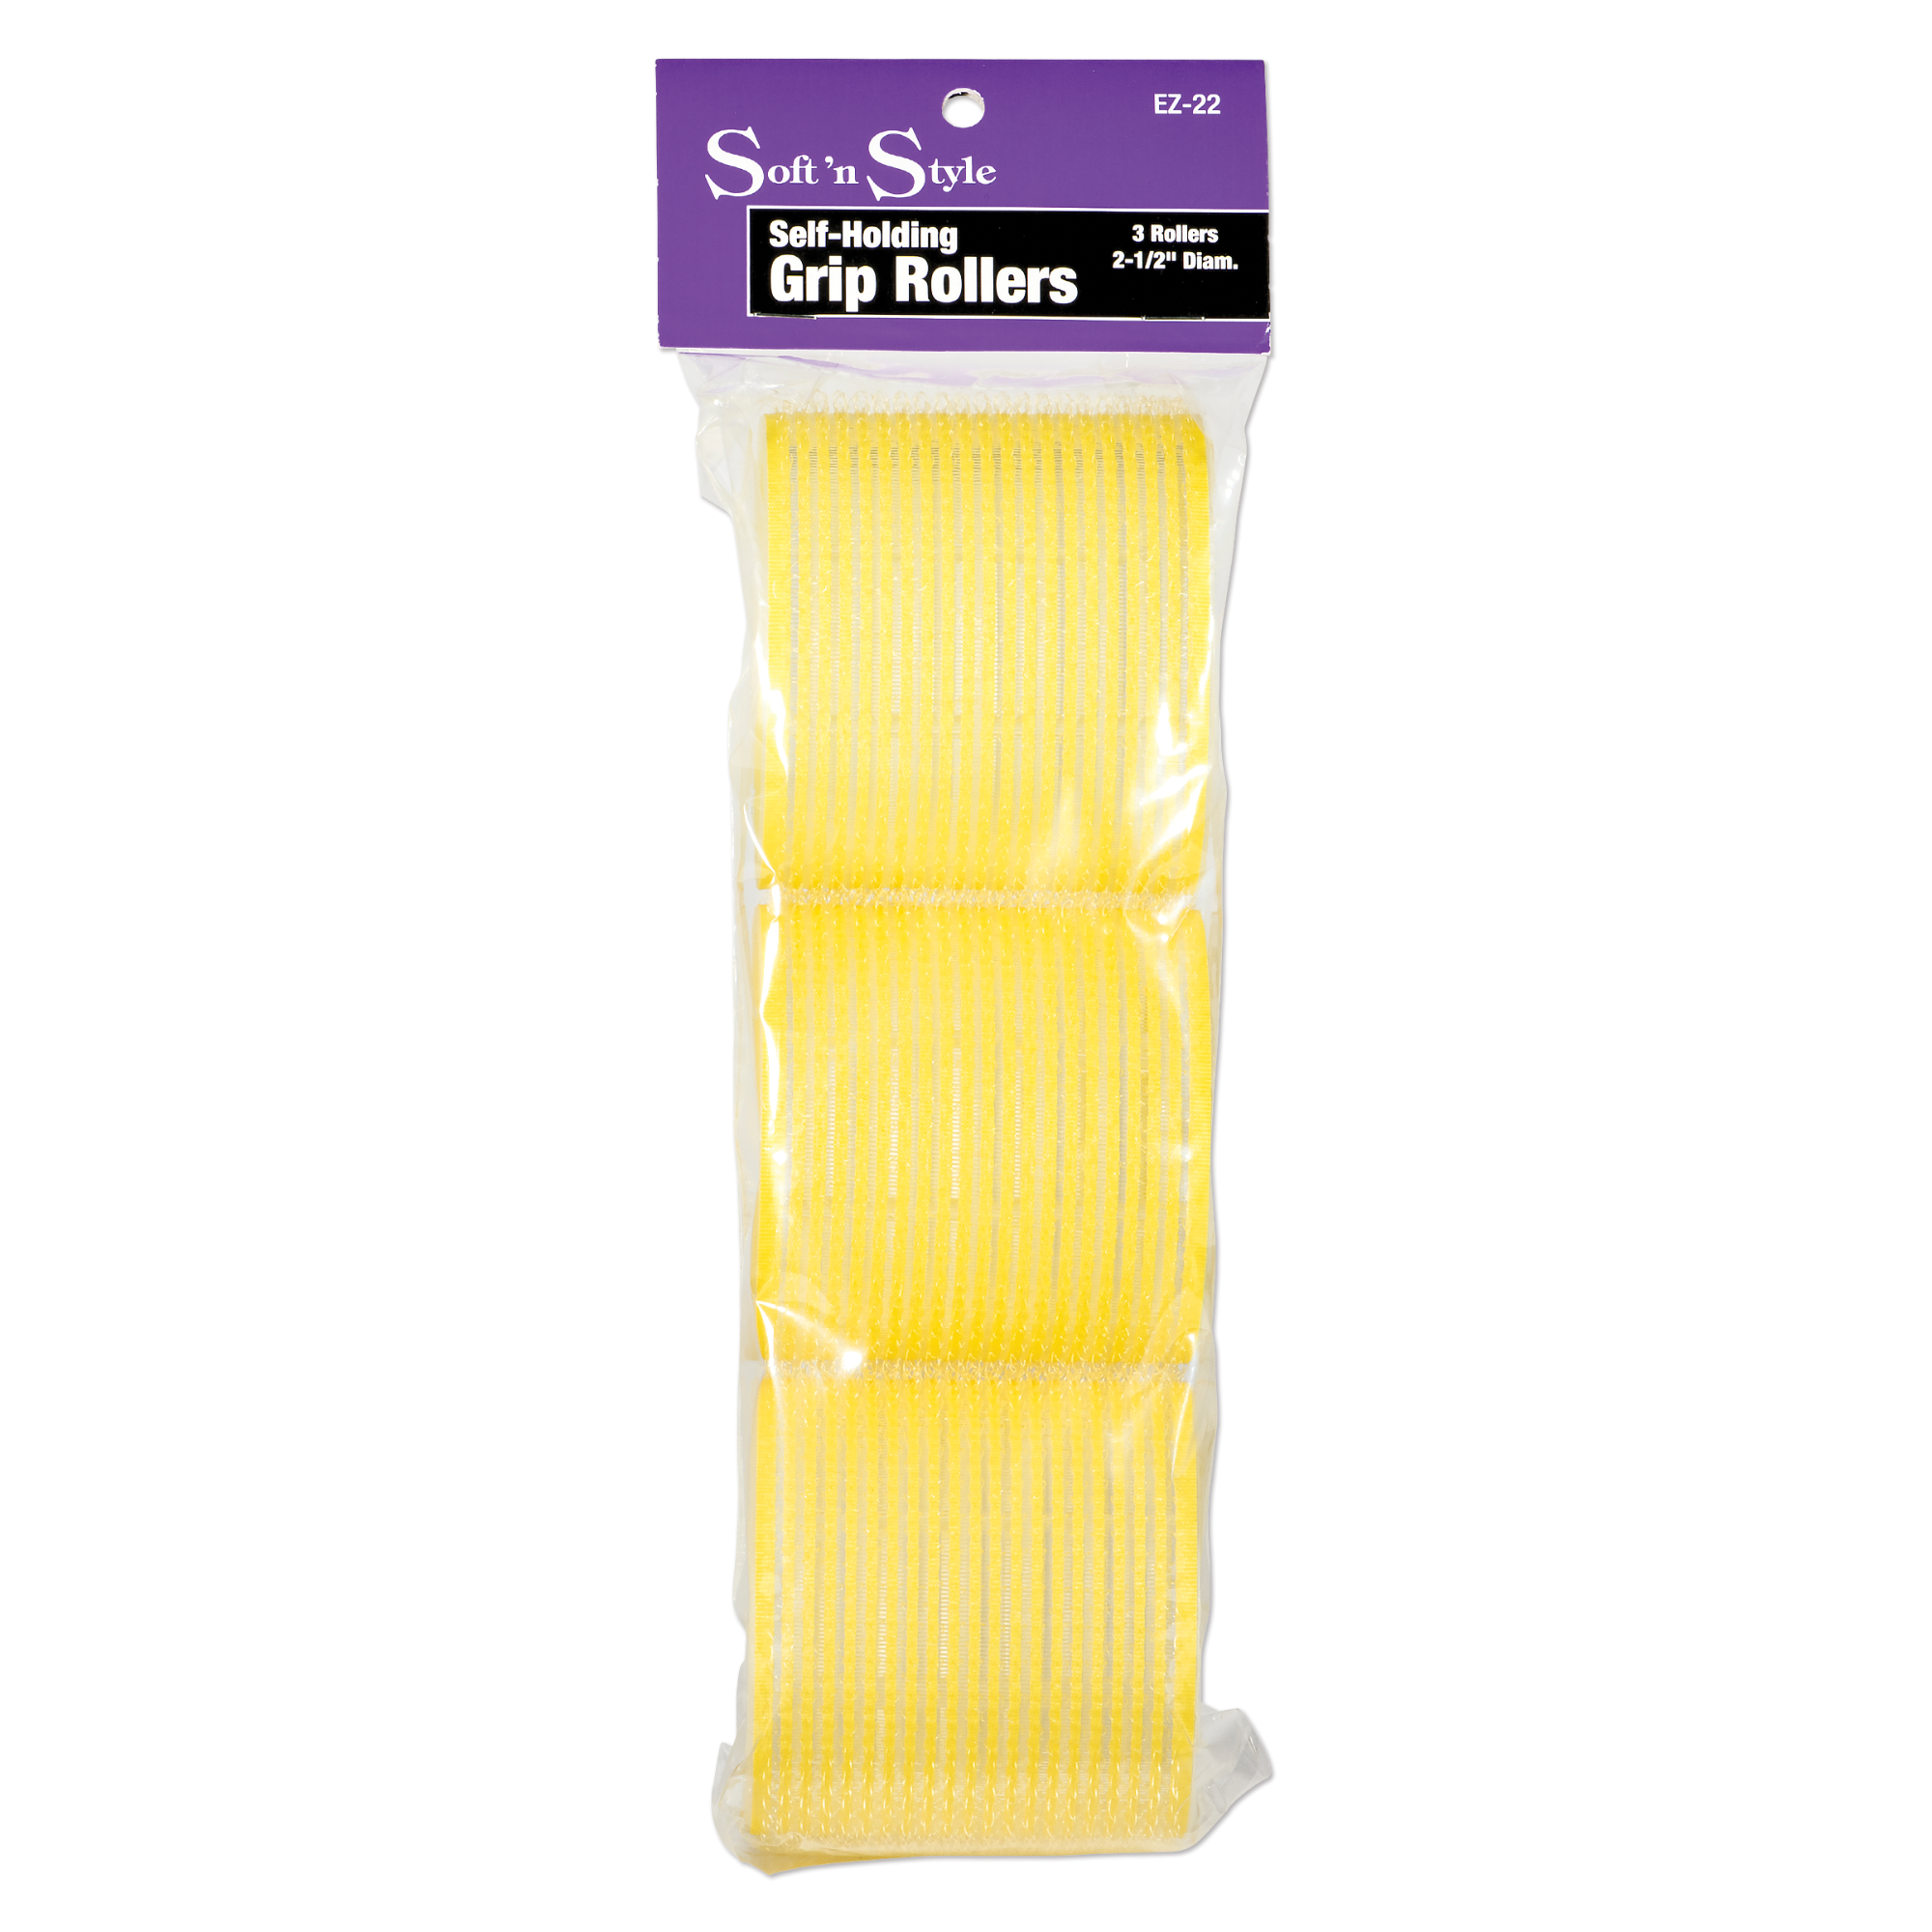 Self-Grip Rollers, Yellow/White - 2-1/2"